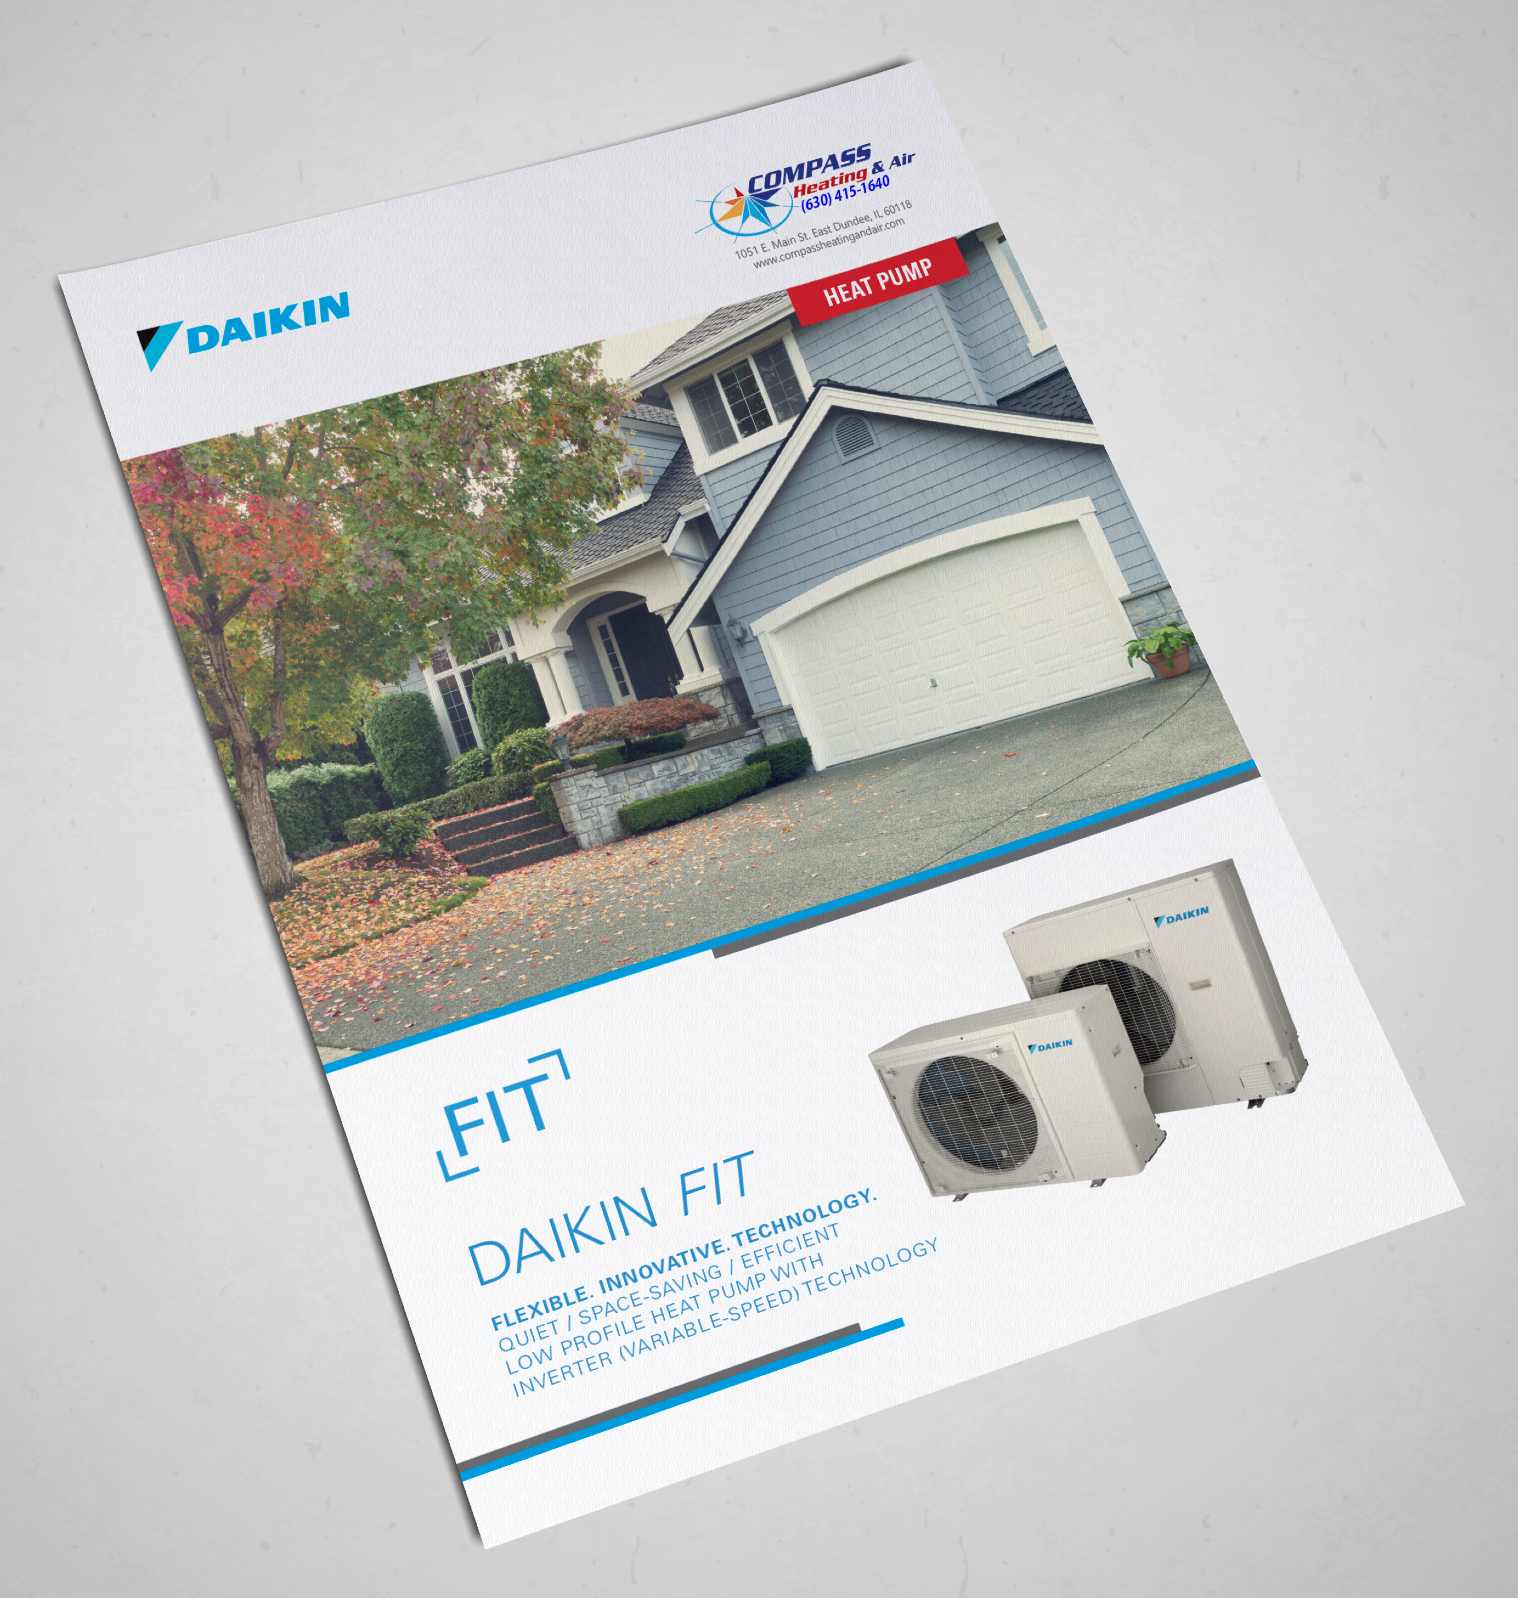 Daikin Fit Product Guide Cover 2